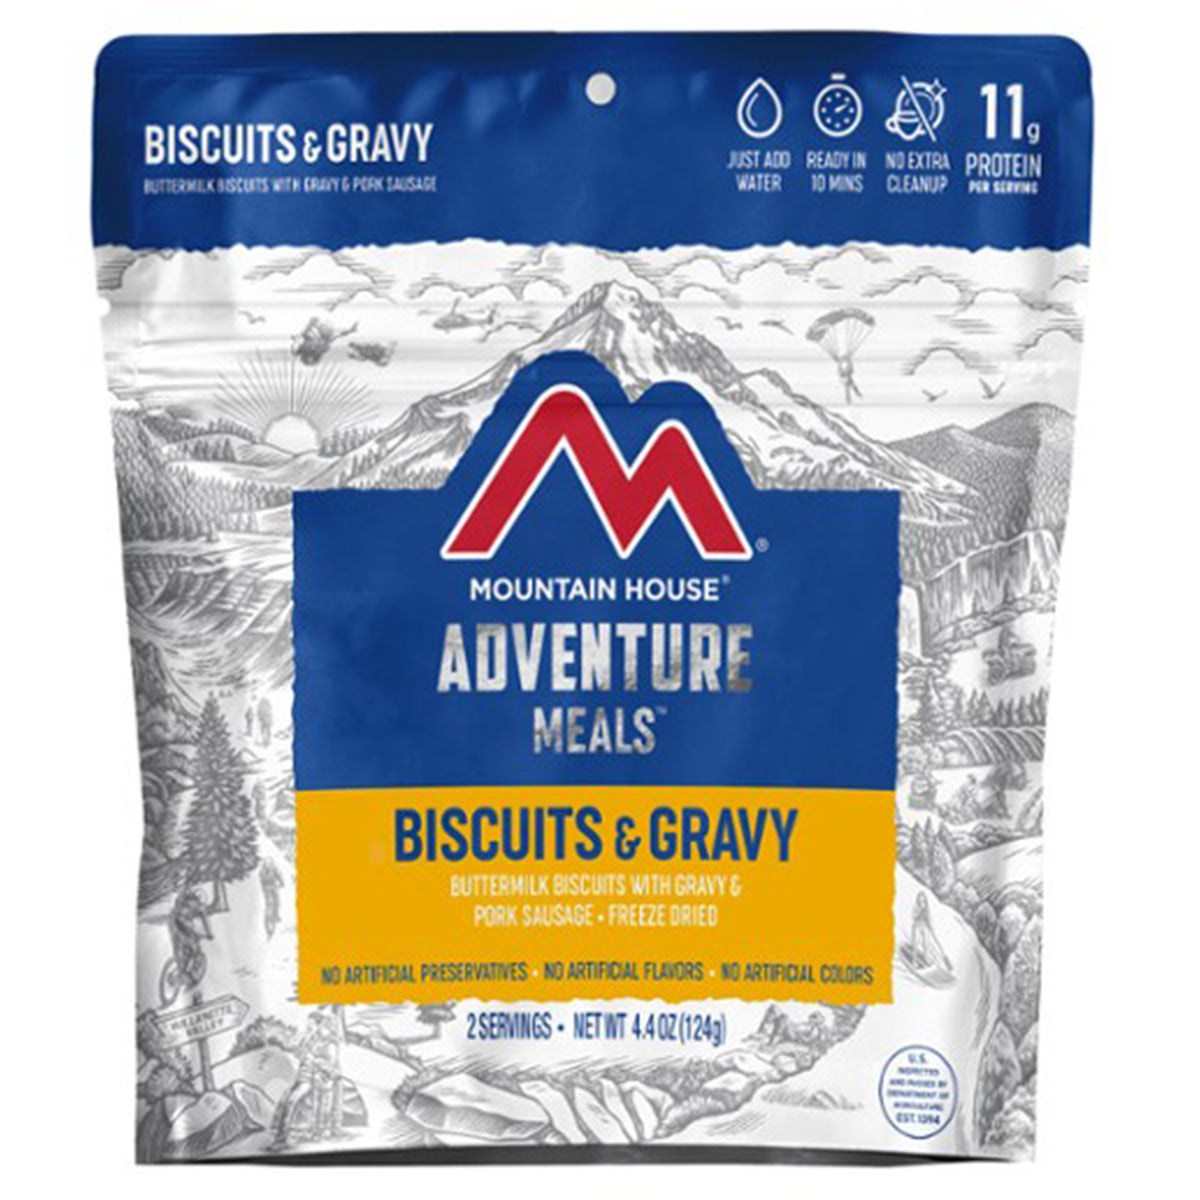 Mountain House Biscuits & Gravy in Mountain House Biscuits & Gravy - goHUNT Shop by GOHUNT | Mountain House - GOHUNT Shop